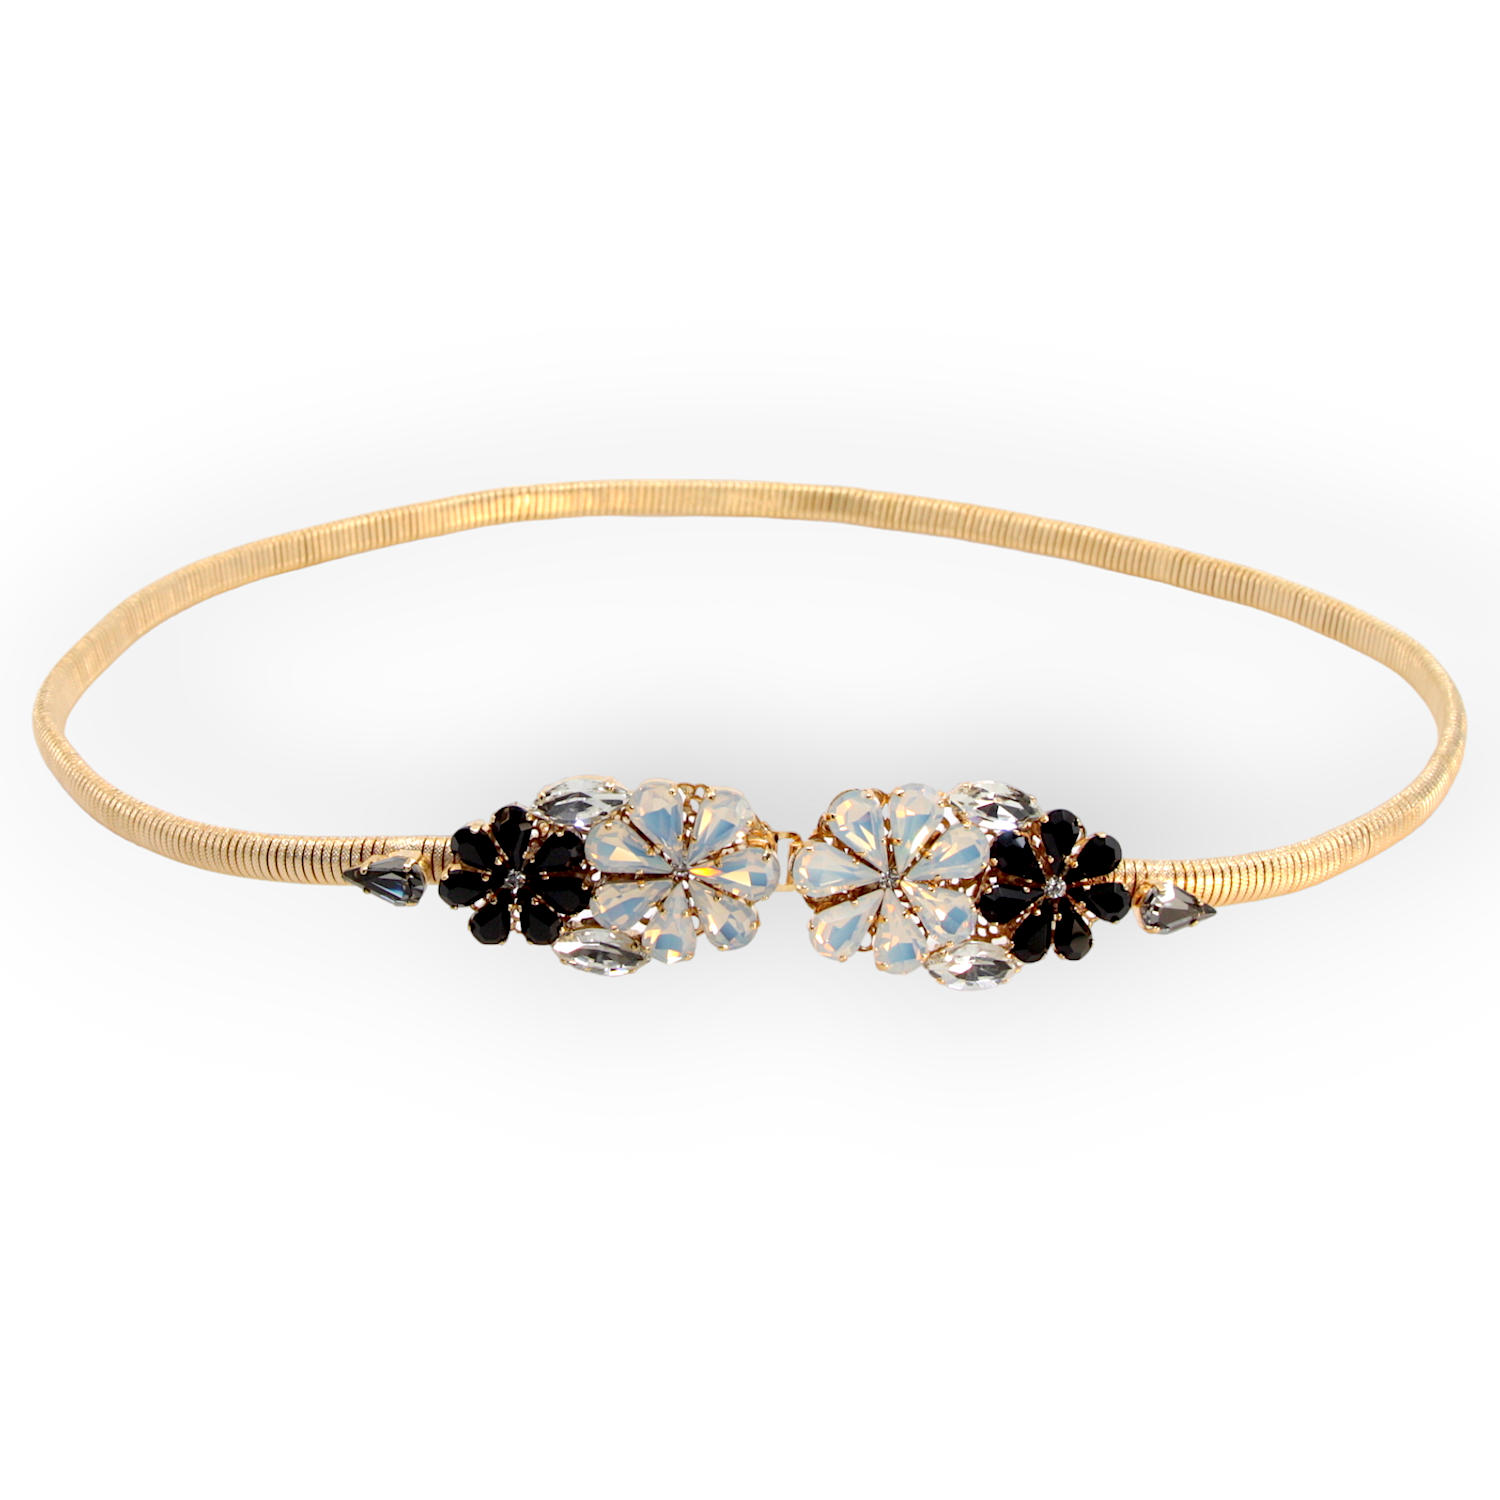 GOLD PLATED STRETCH METAL BELT WITH DAISY BOUQUET CRYSTAL BUCKLE BLACK AND WHITE